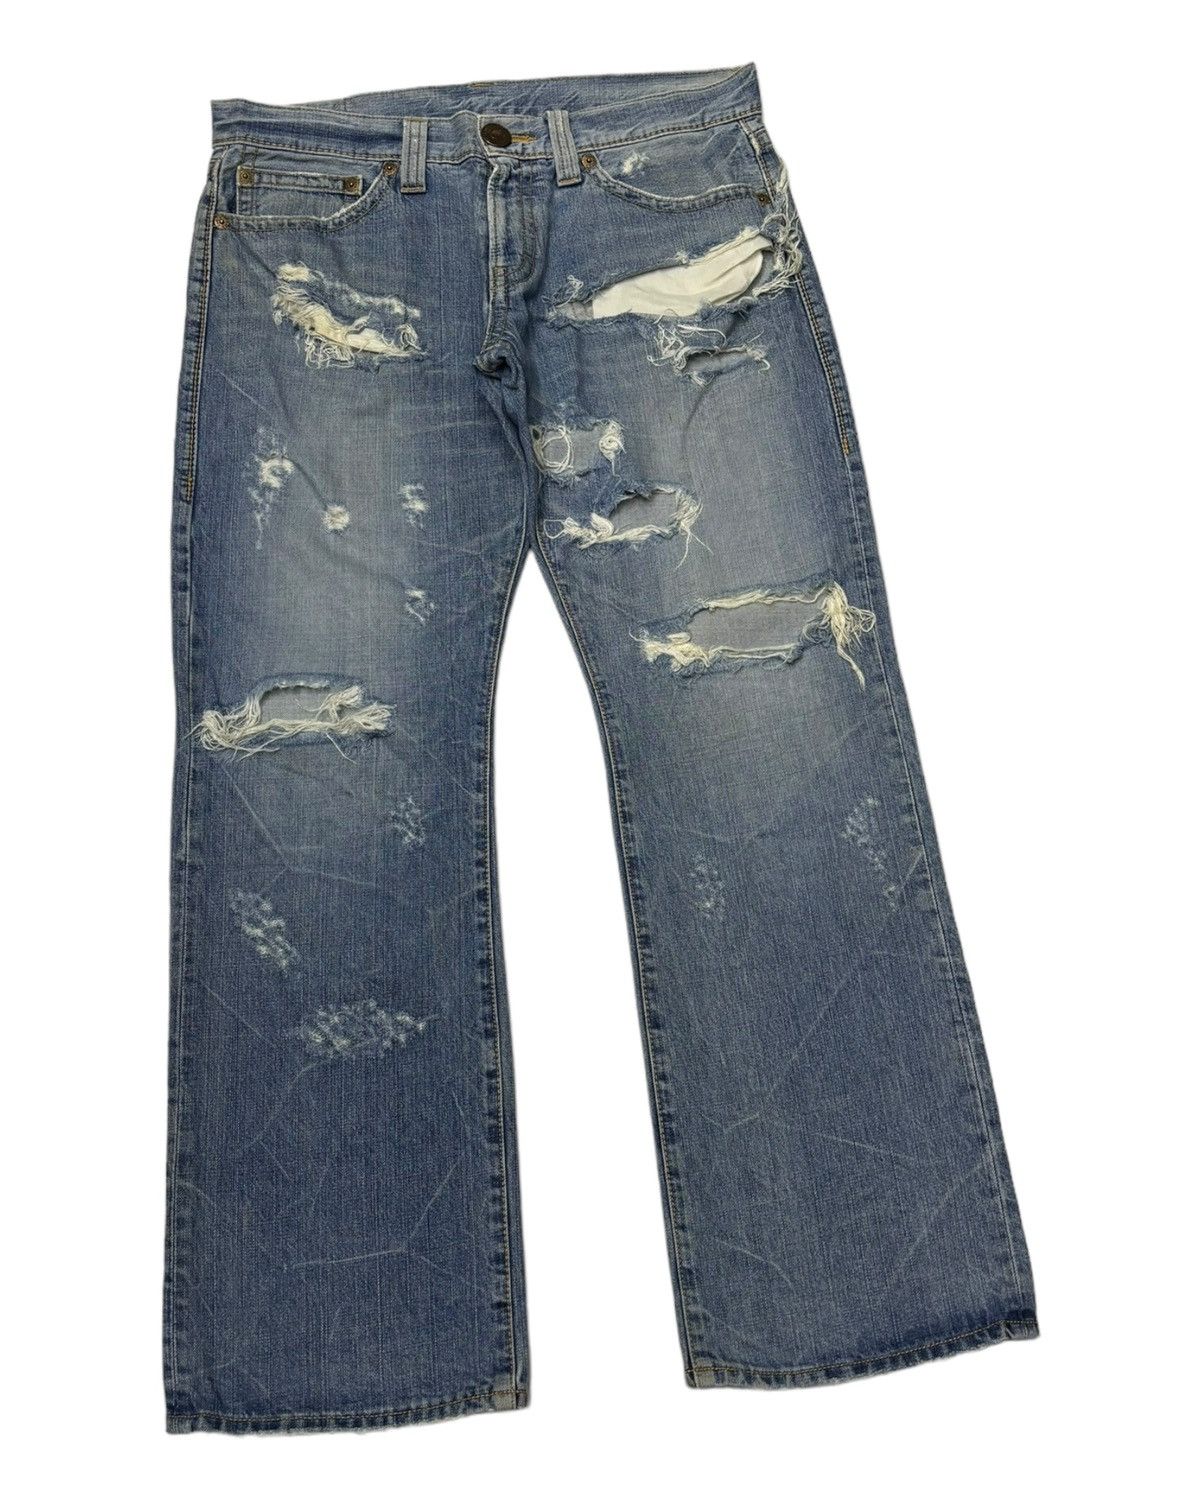 Archival Clothing - VINTAGE CO&LU THRASHED DISTRESS RIPS BAGGY FLARE JEANS - 5